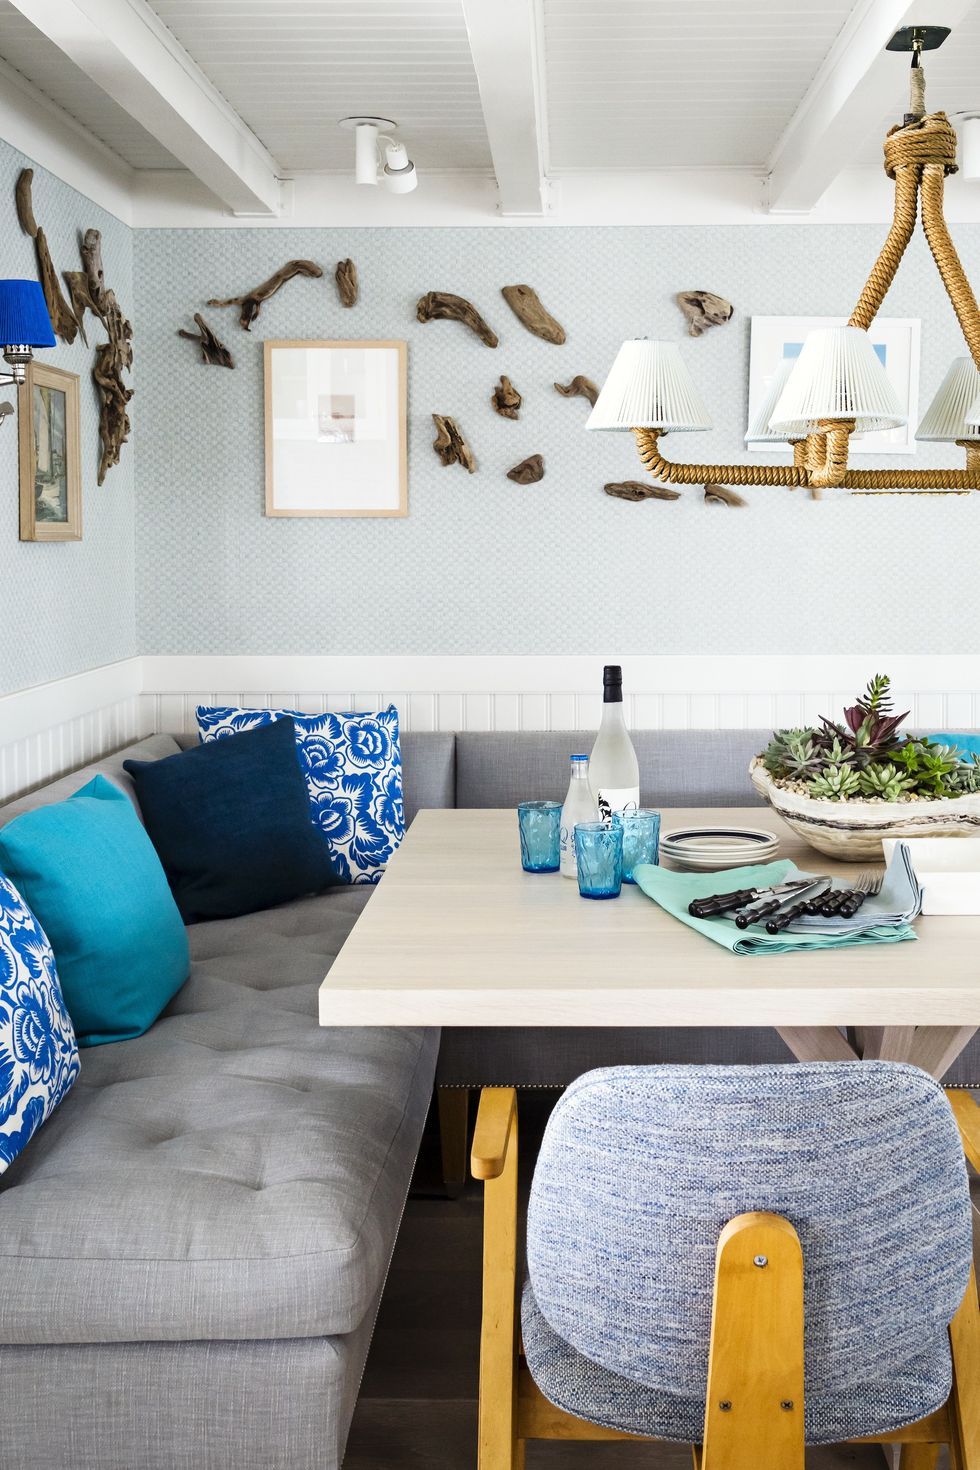 Breakfast Table Ideas for Small Spaces